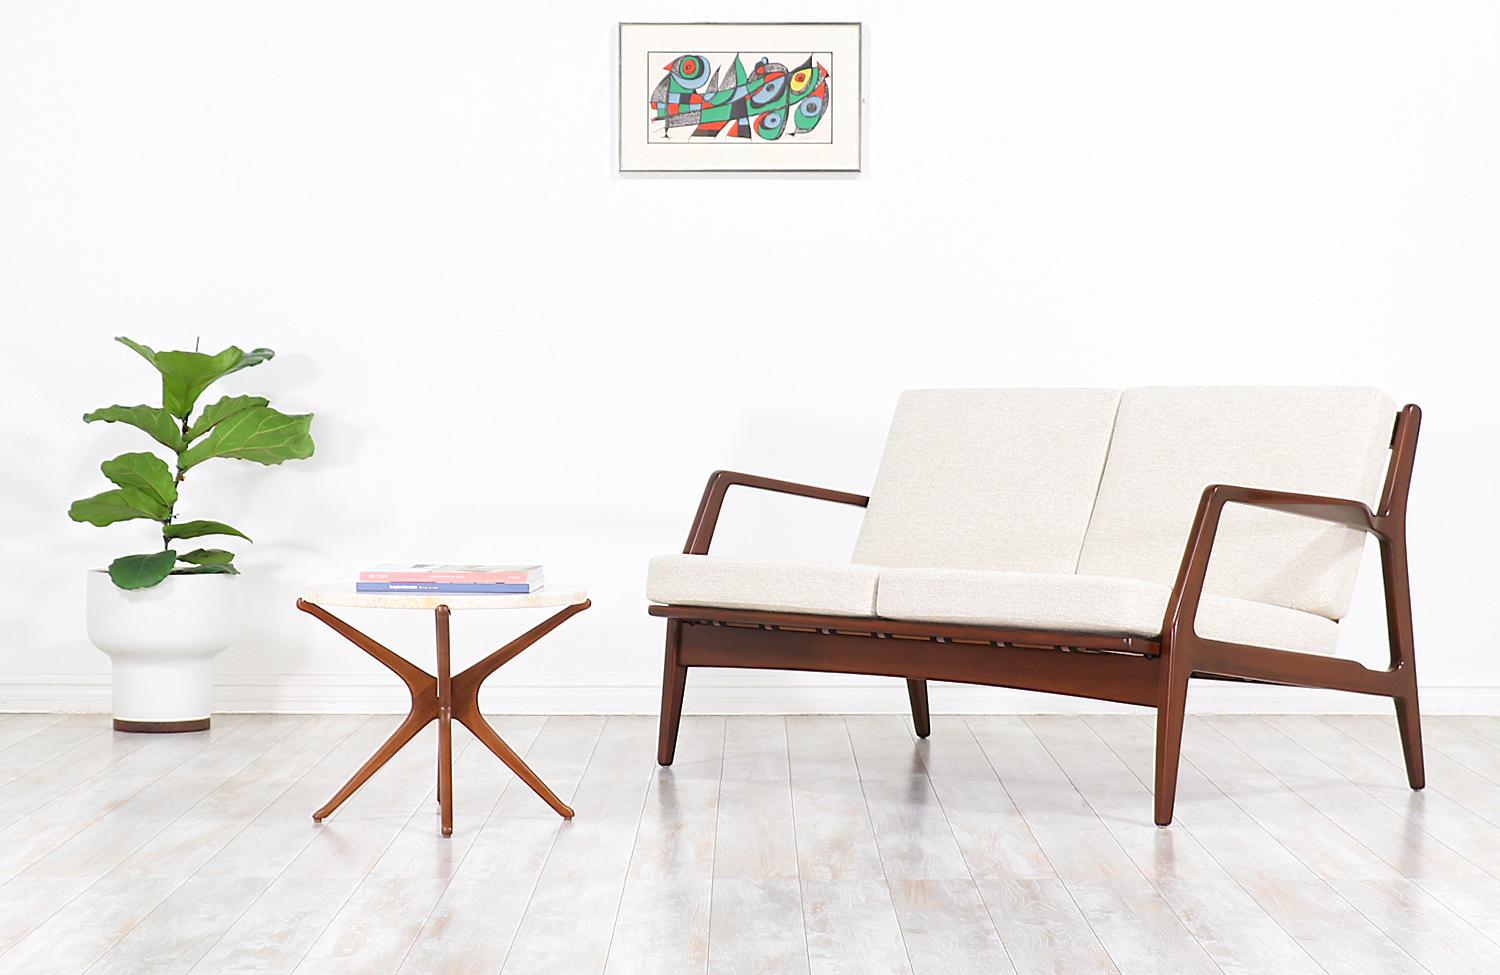 Stylish two-seat modern love seat designed by Danish architect and furniture designer Ib-Kofod Larsen for Selig in Denmark, circa 1960s. This elegant and compact sofa features a solid sculpted walnut-stained beechwood frame with armrests on both